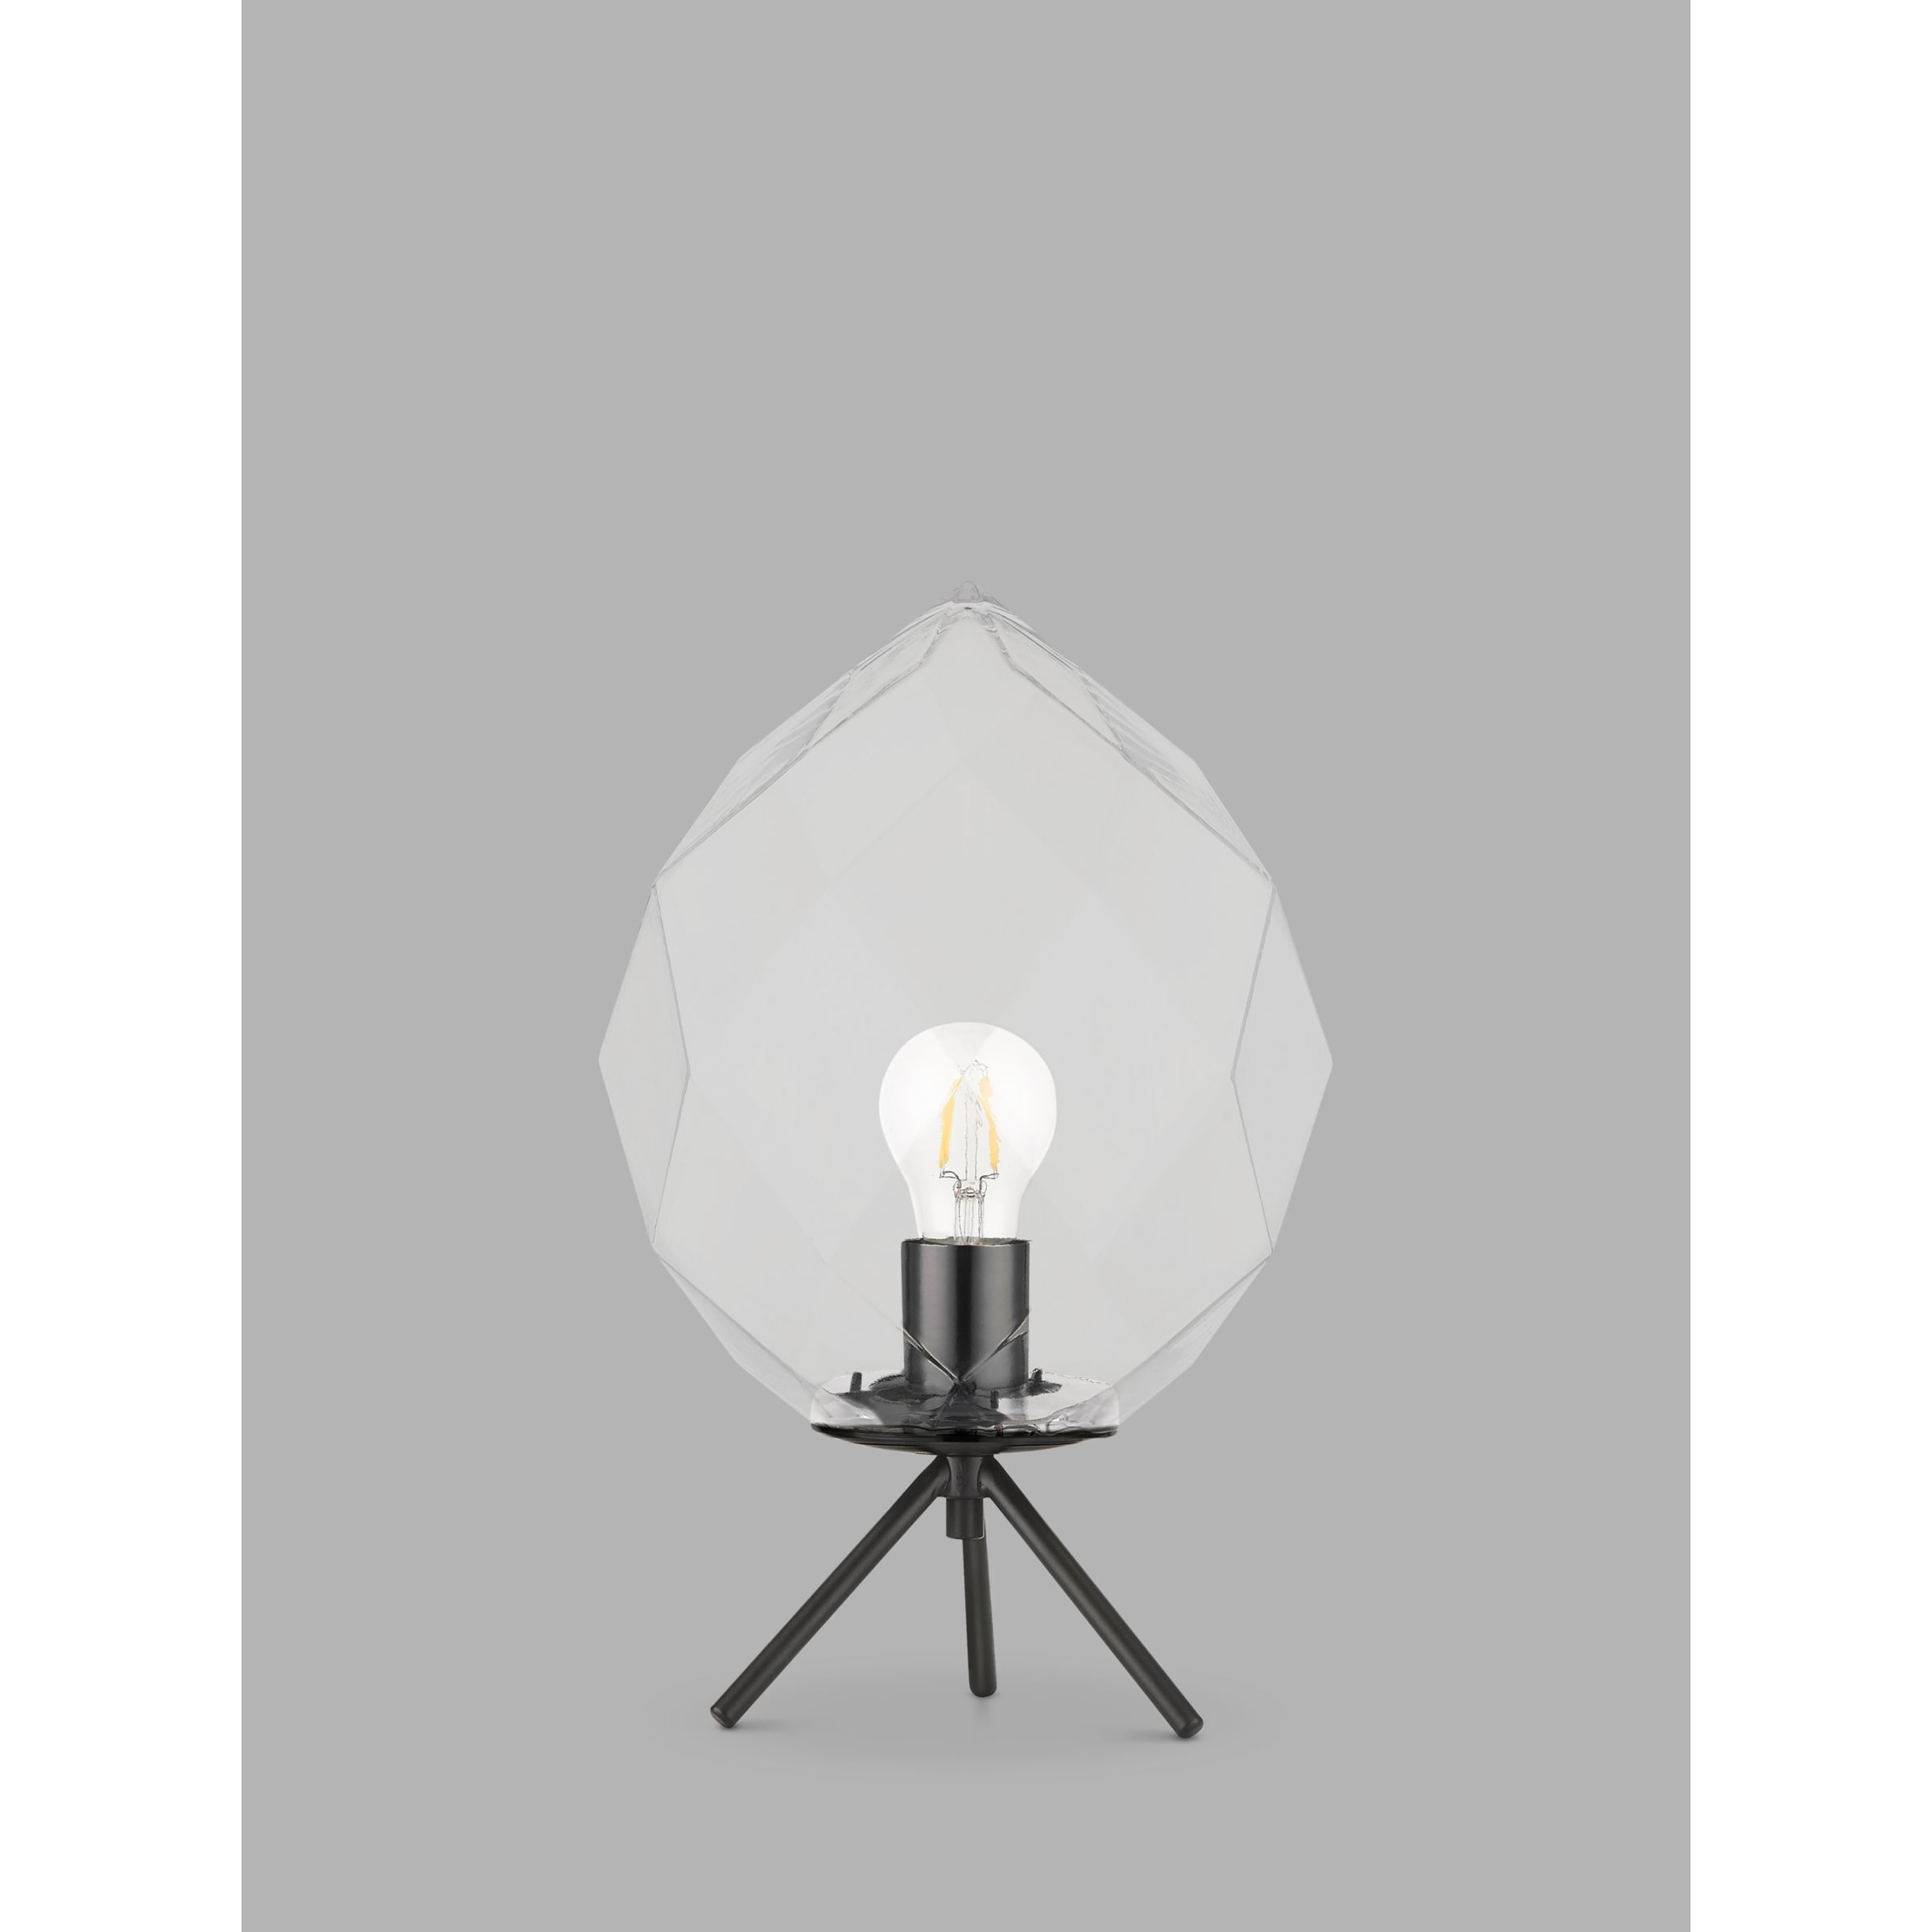 Impex Zoe Table Lamp - image 1